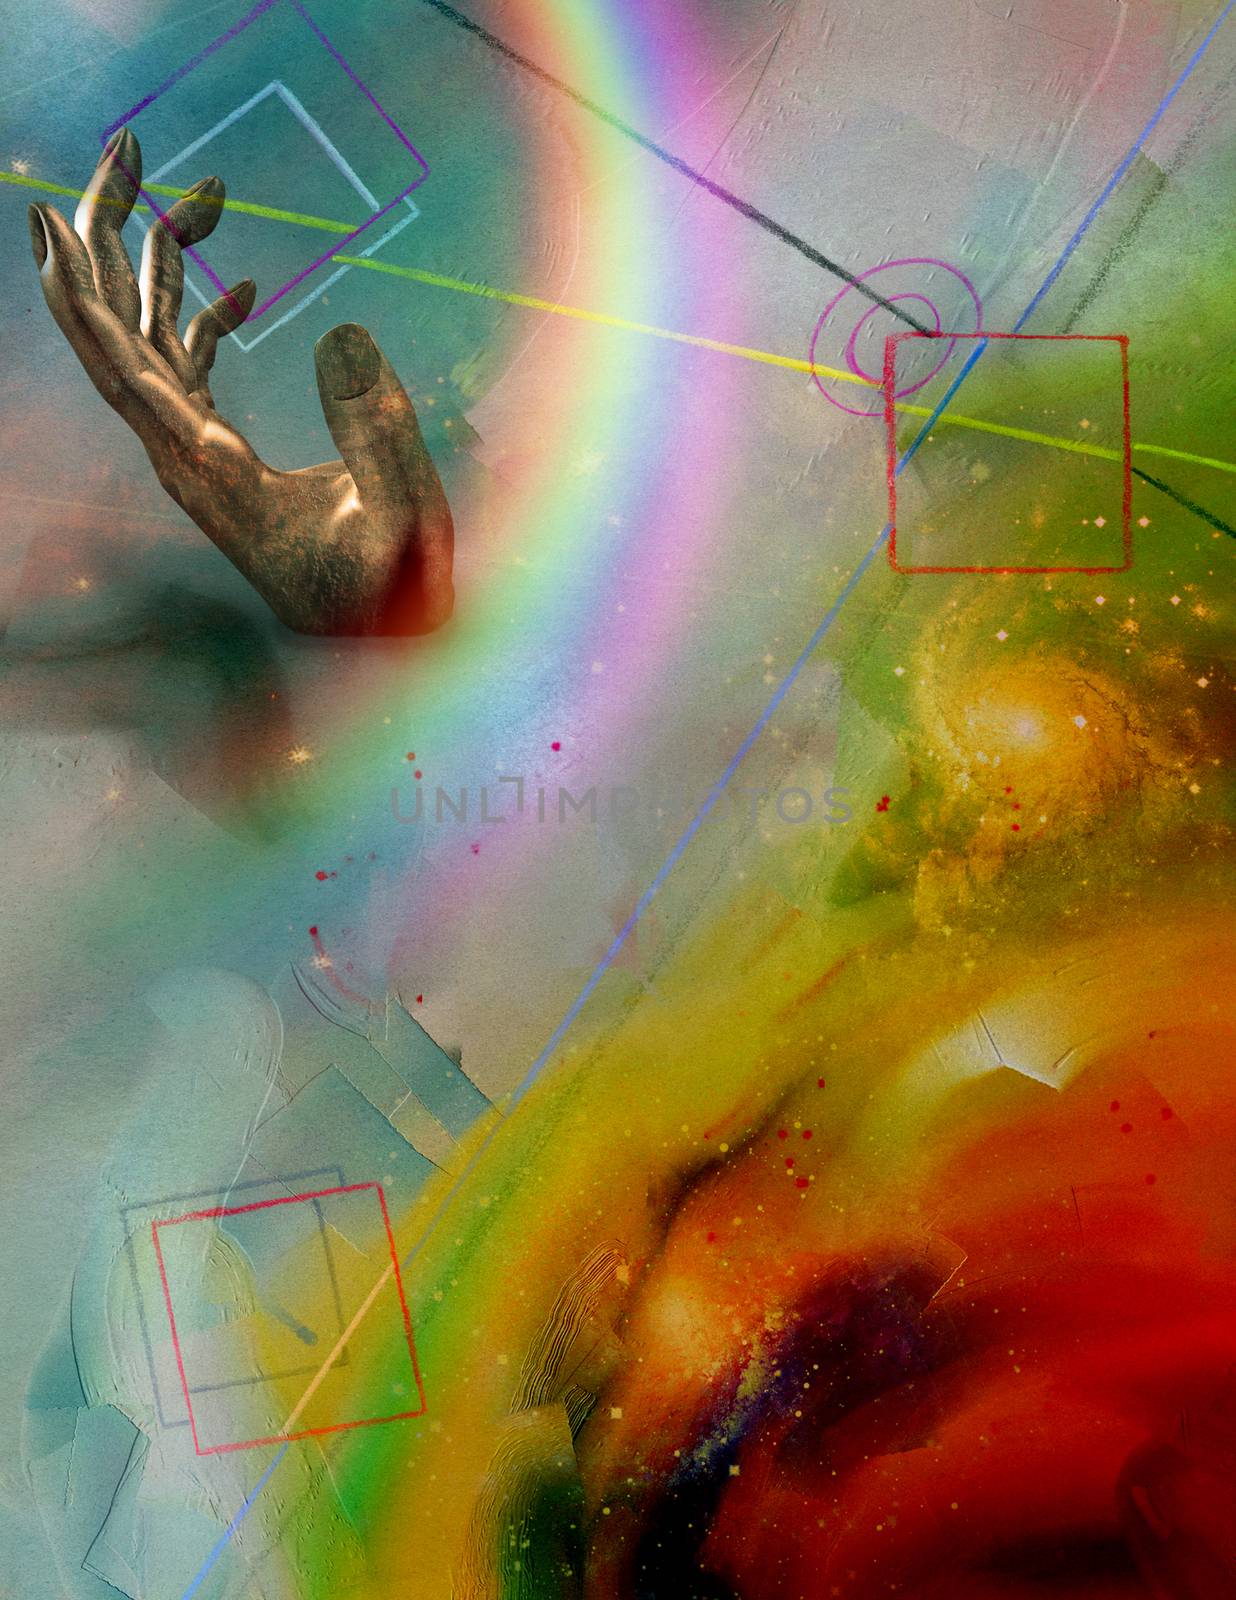 Futurism Abstract, Rainbow in hand